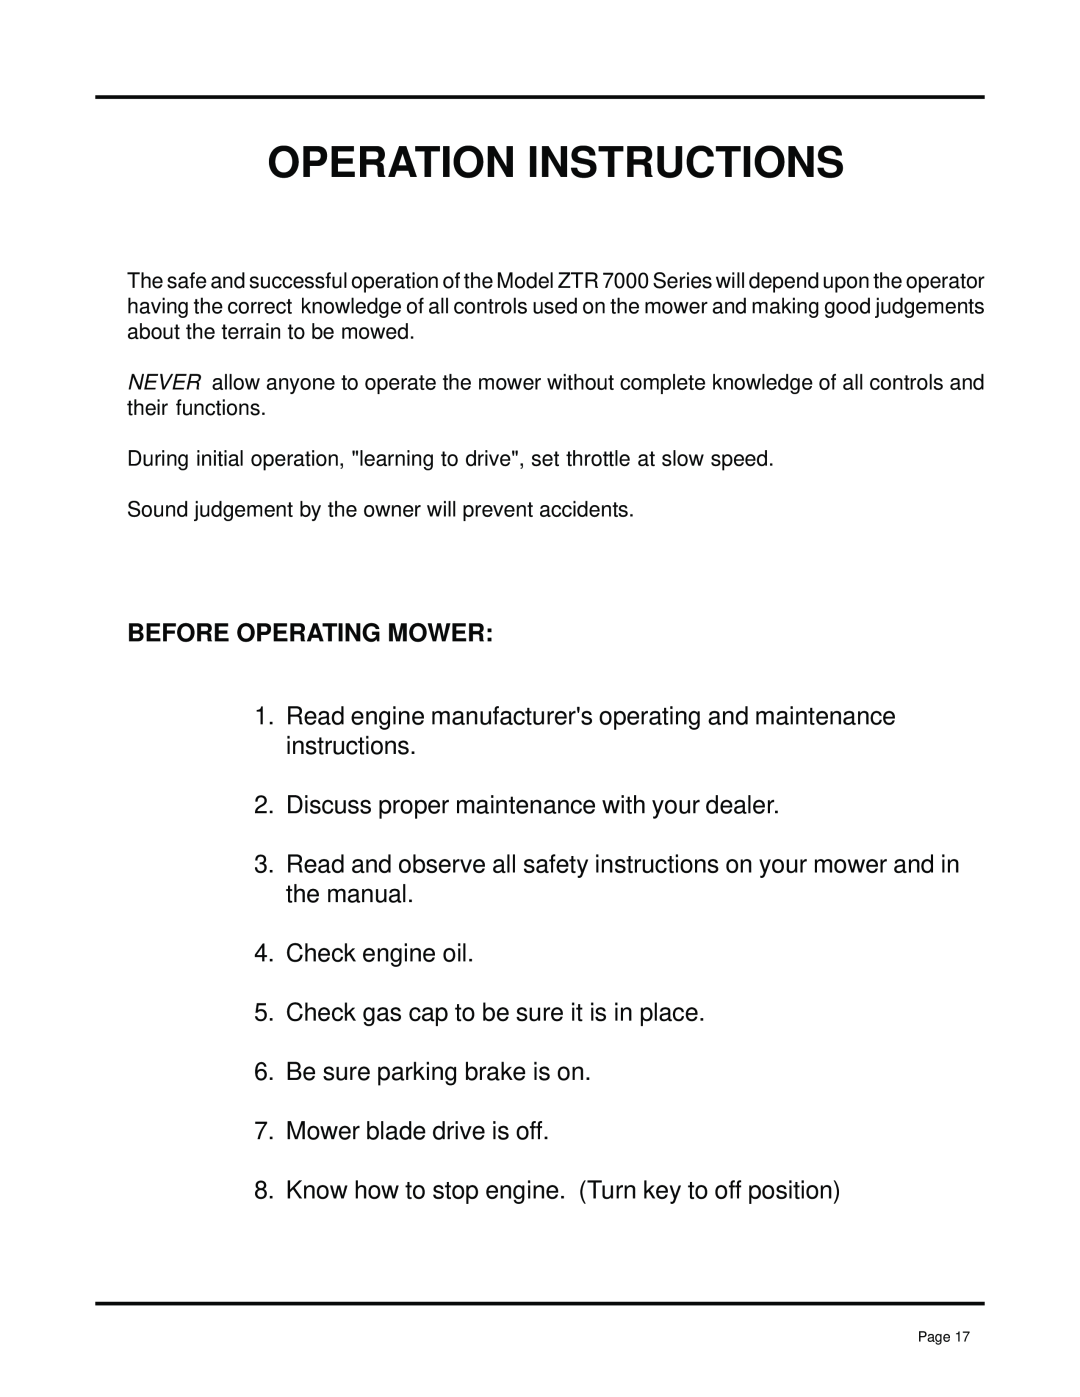 Dixon 13091-0500, ZTR 7025 manual Operation Instructions, Before Operating Mower 